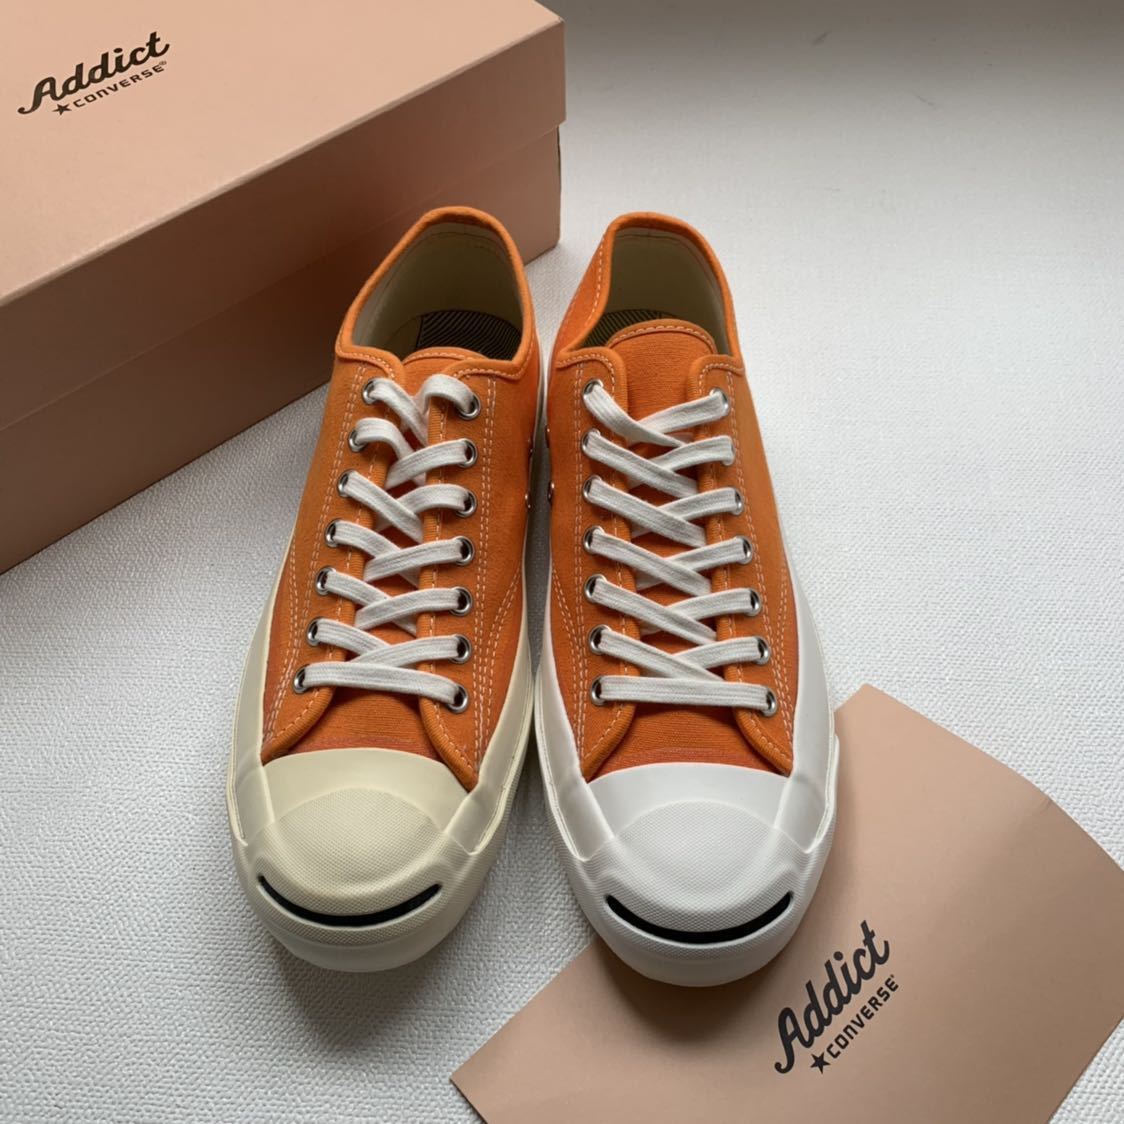 converse jack purcell addict 2016